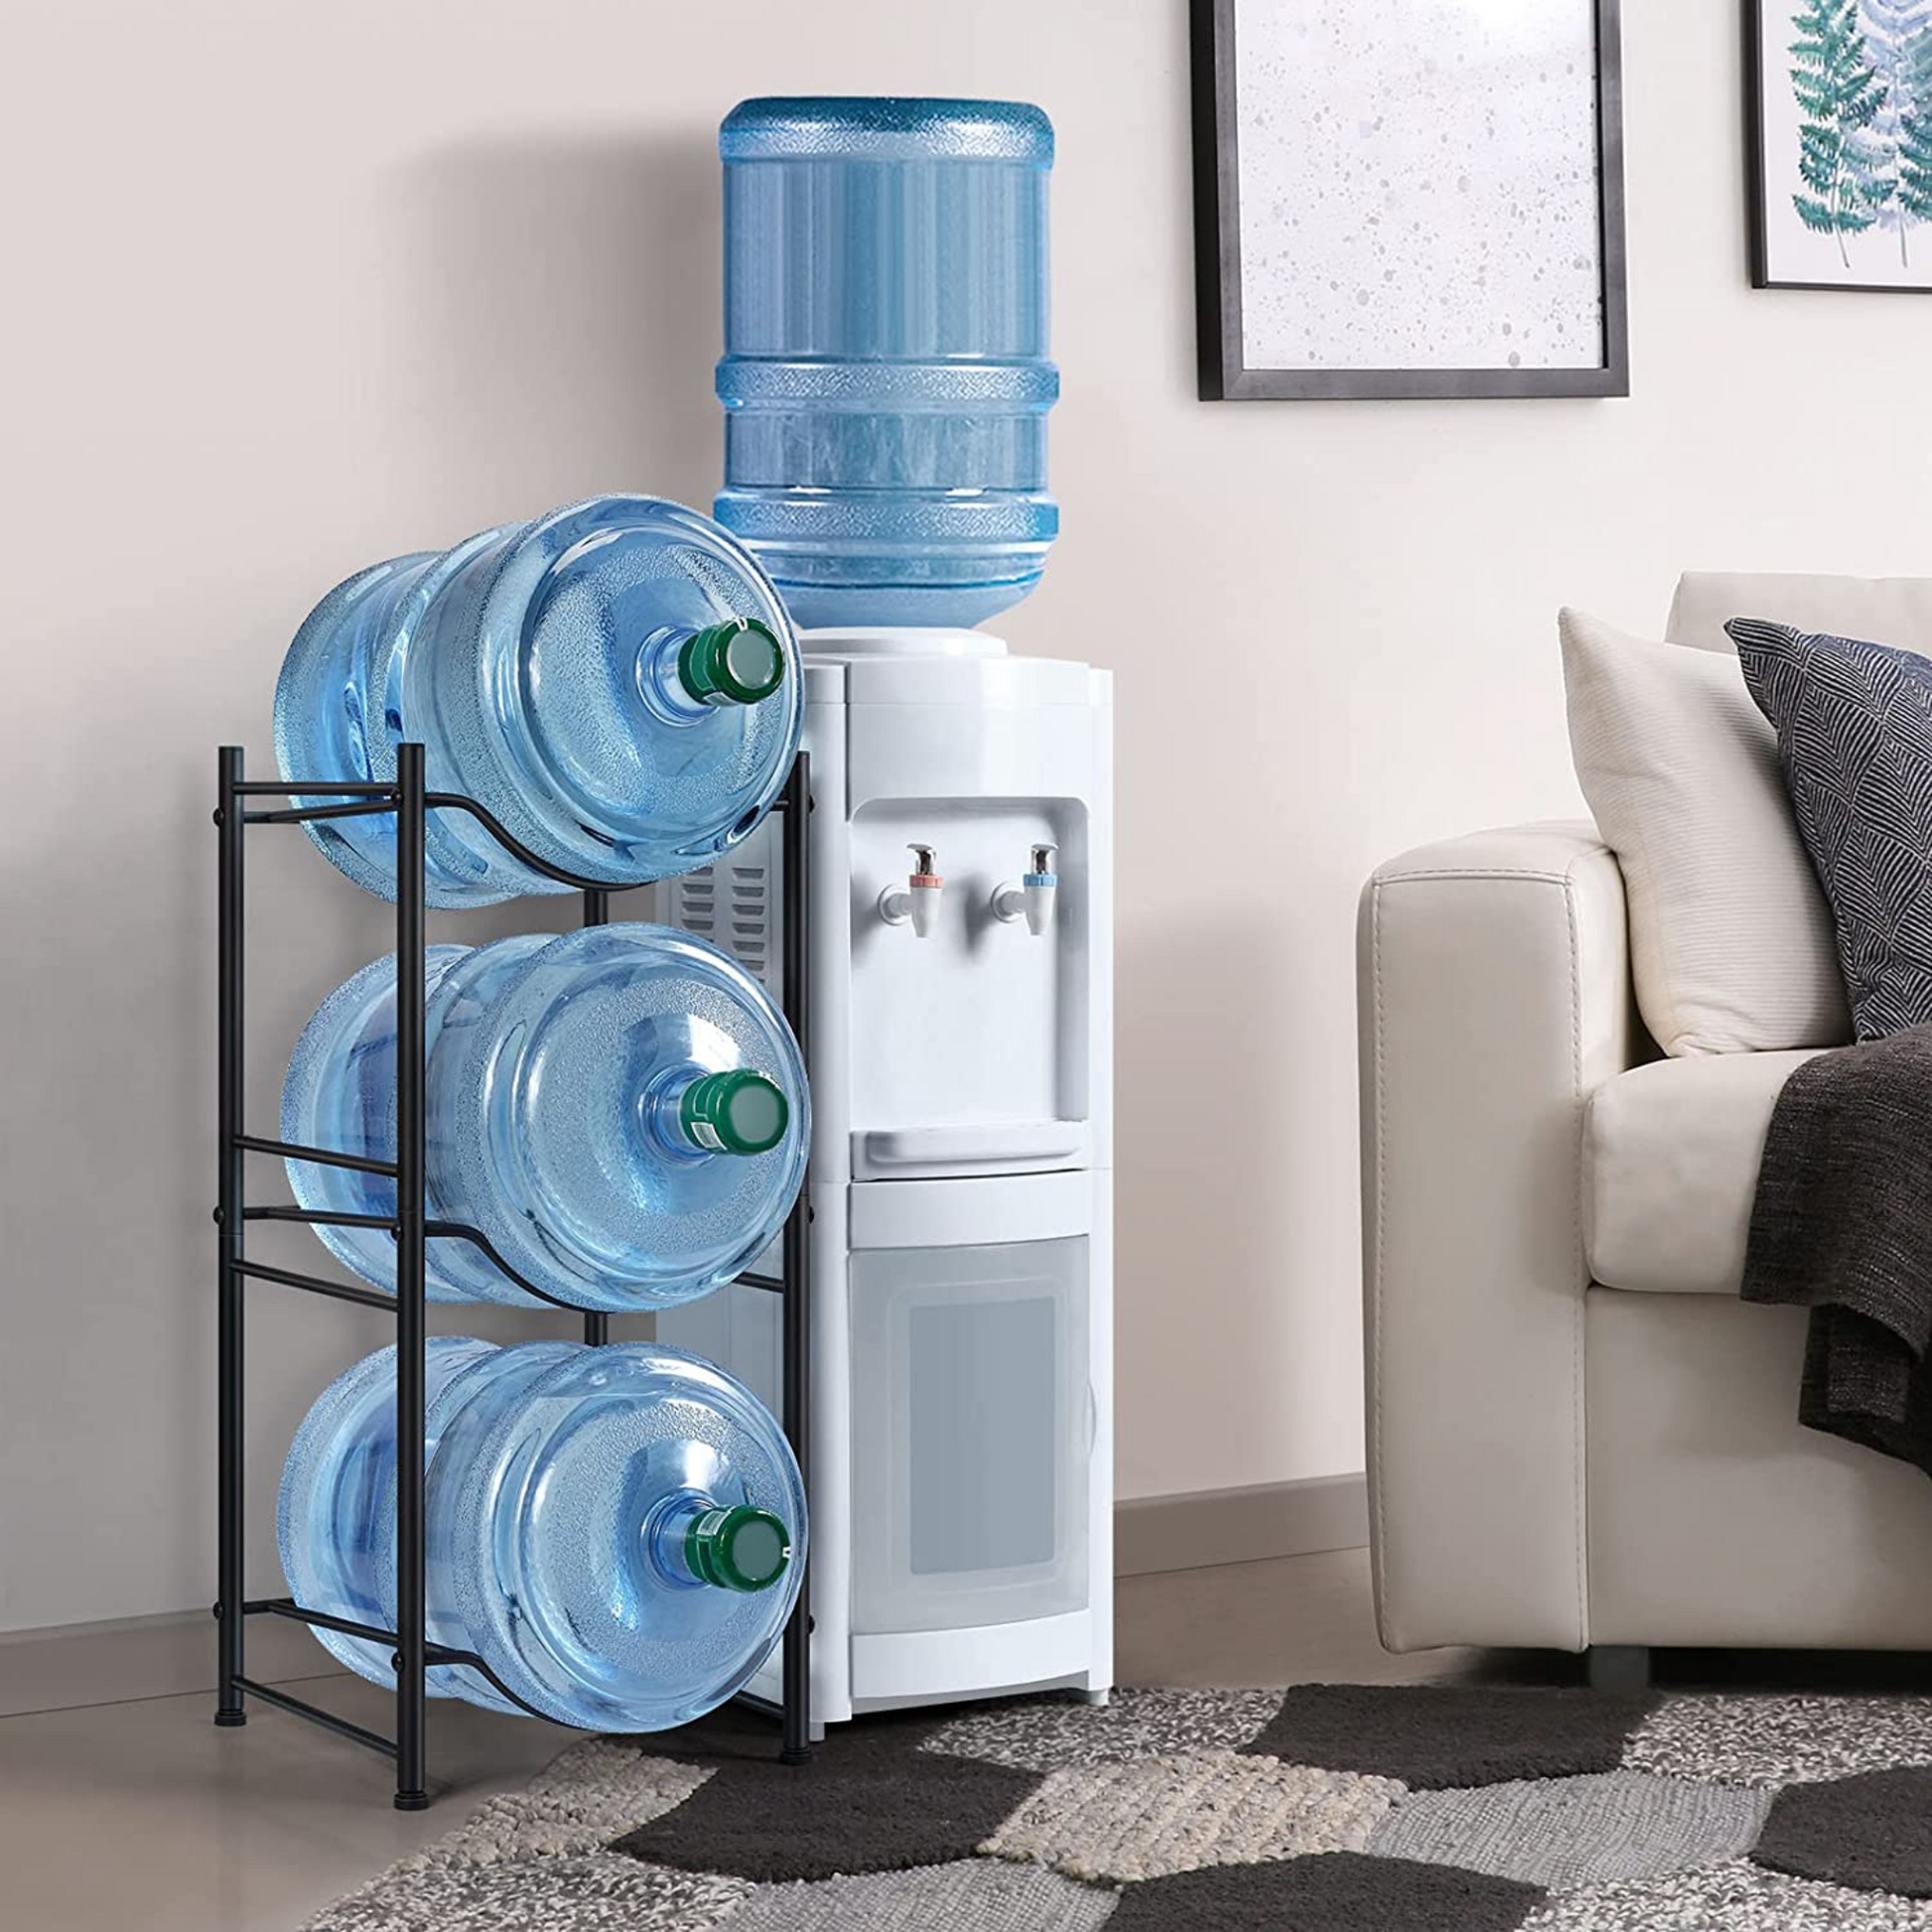 Simplify your water bottle storage with our 3-tier water jug rack in black. Made of premium steel, it's a sturdy and convenient storage solution that can hold up to 5 water bottles. Perfect for busy individuals who need quick and easy access to water.